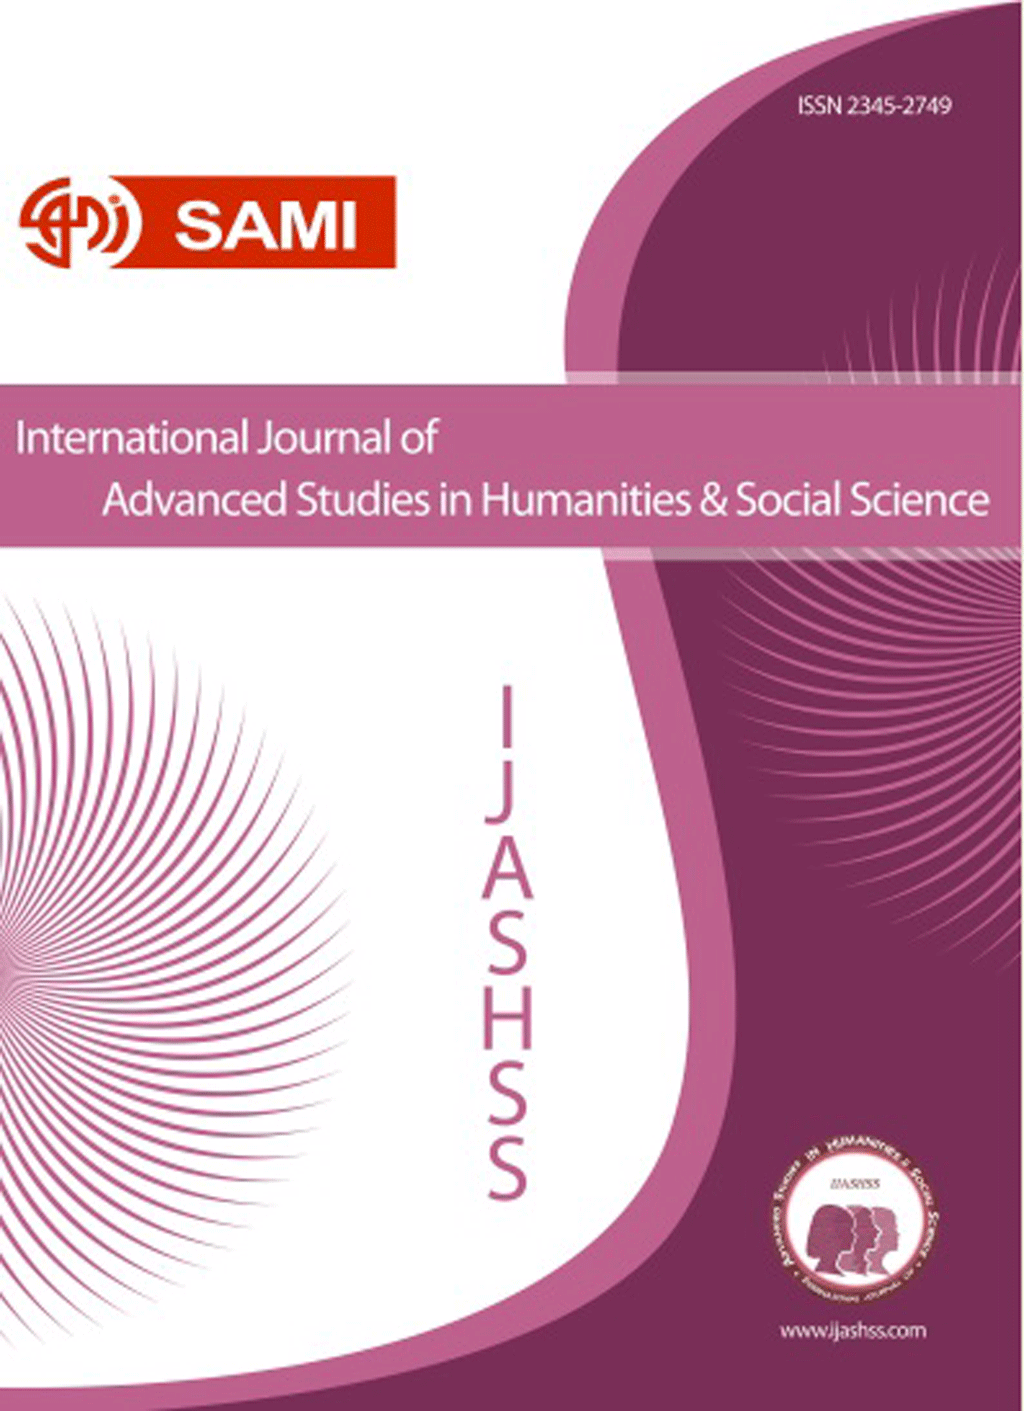 International Journal of Advanced Studies in Humanities and Social Science - April 2015, Volume 4 - Issue 2